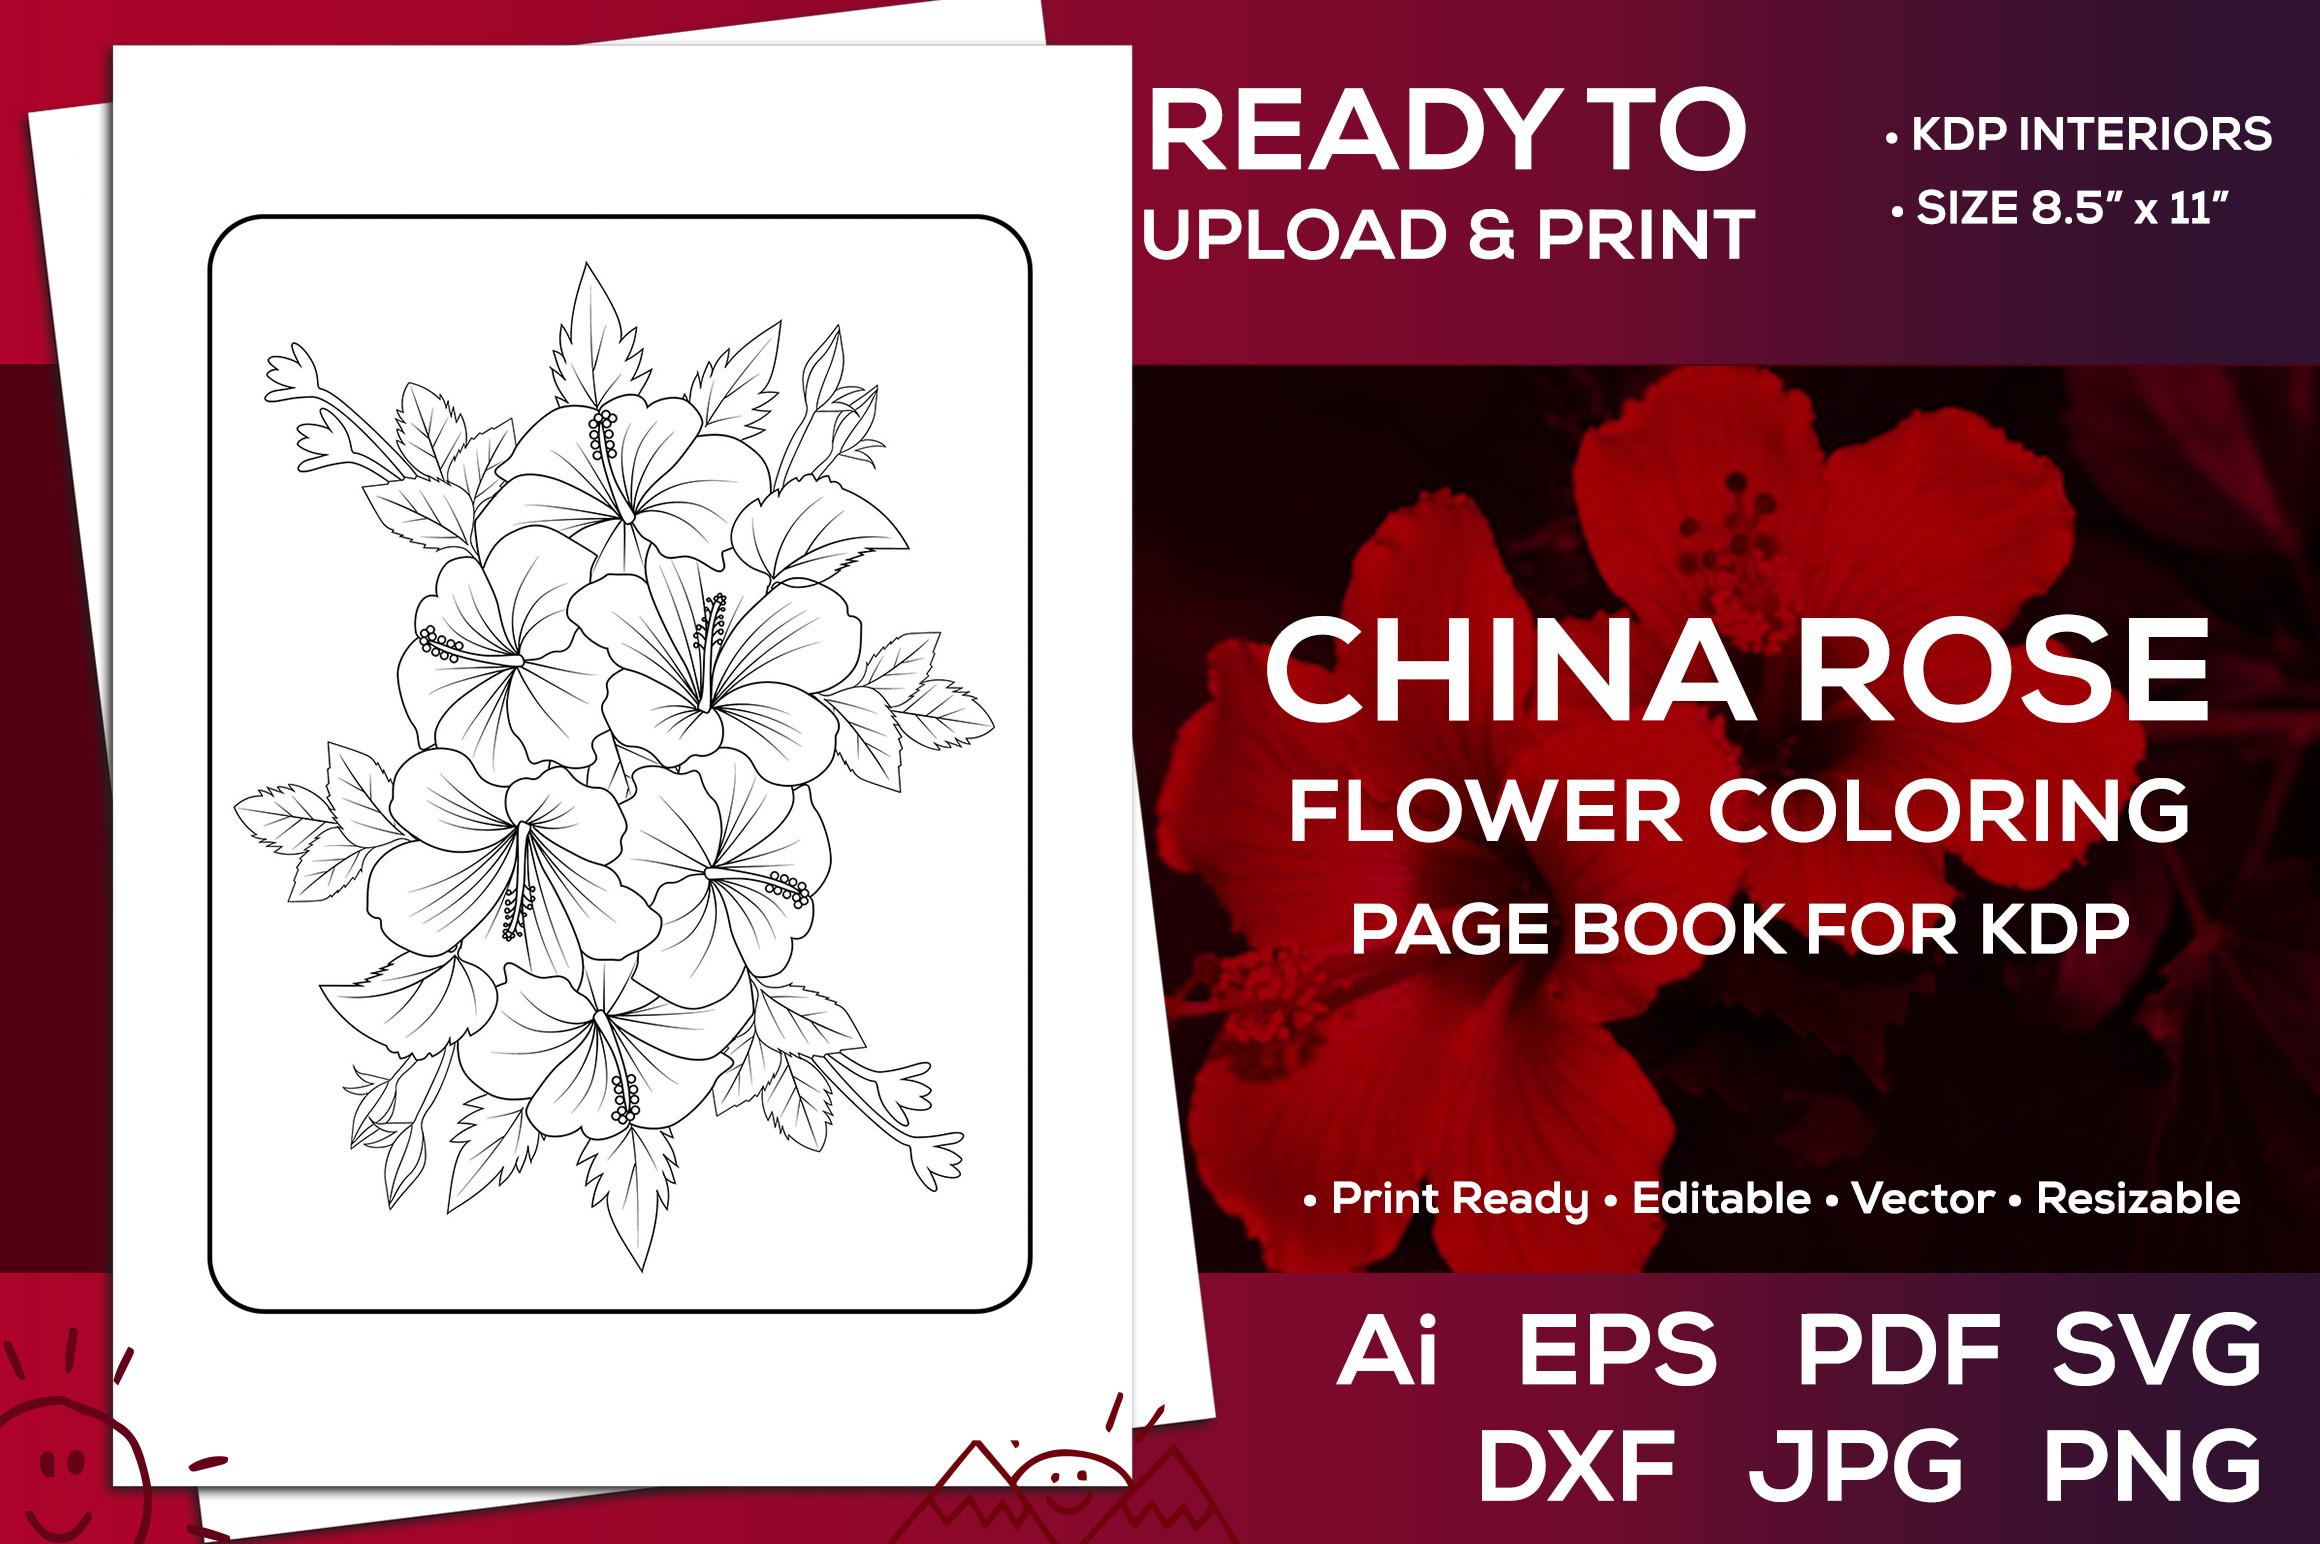 Free Flower Coloring Pages of China Rose